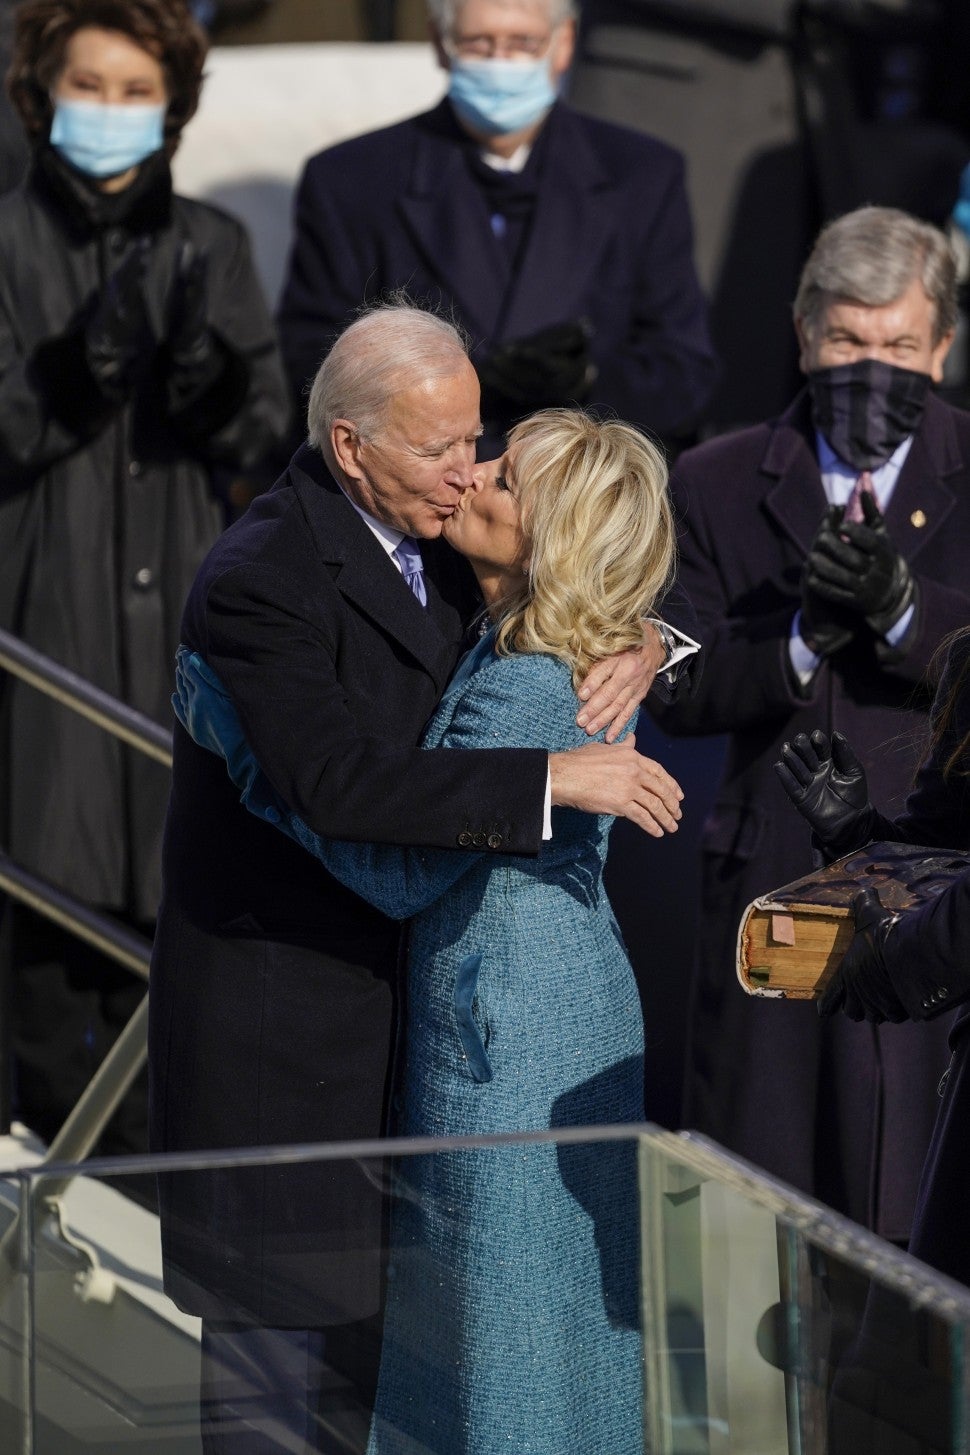 U.S. President Joe Biden(L) hugs his wife First Lady Jill Biden after taking the oath of office from Supreme Court Chief Justice John Roberts during the 59th presidential inauguration in Washington, D.C. on Wednesday, Jan. 20, 2021. 